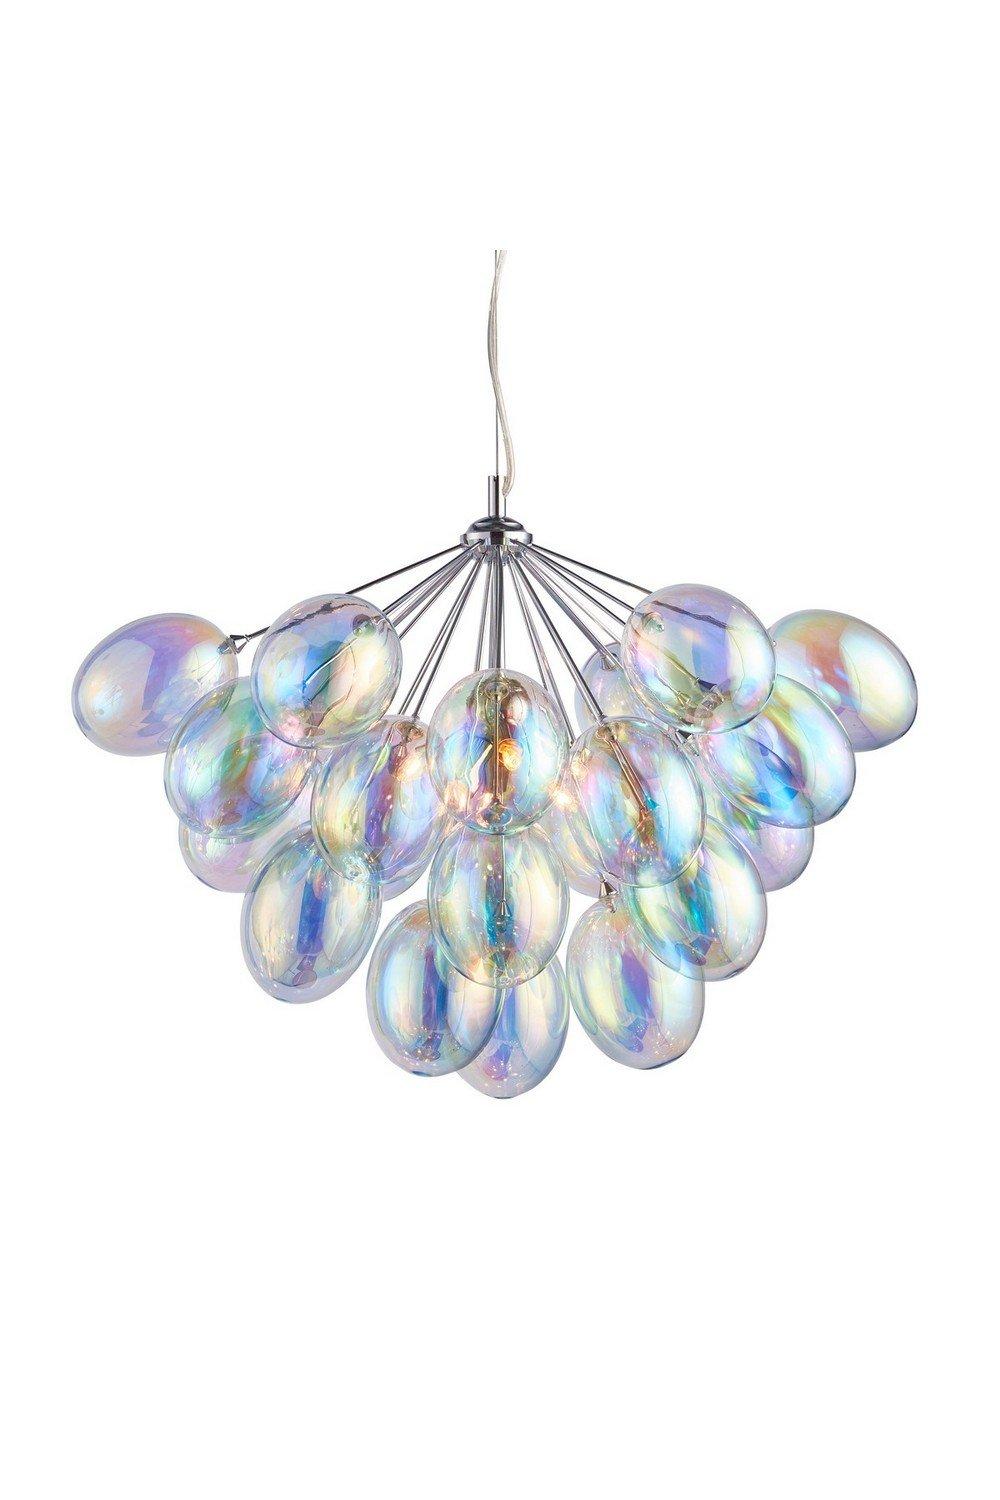 Infinity Pendant Chrome Effect Plate & Dichroic Glass 6 Light Dimmable IP20 G9